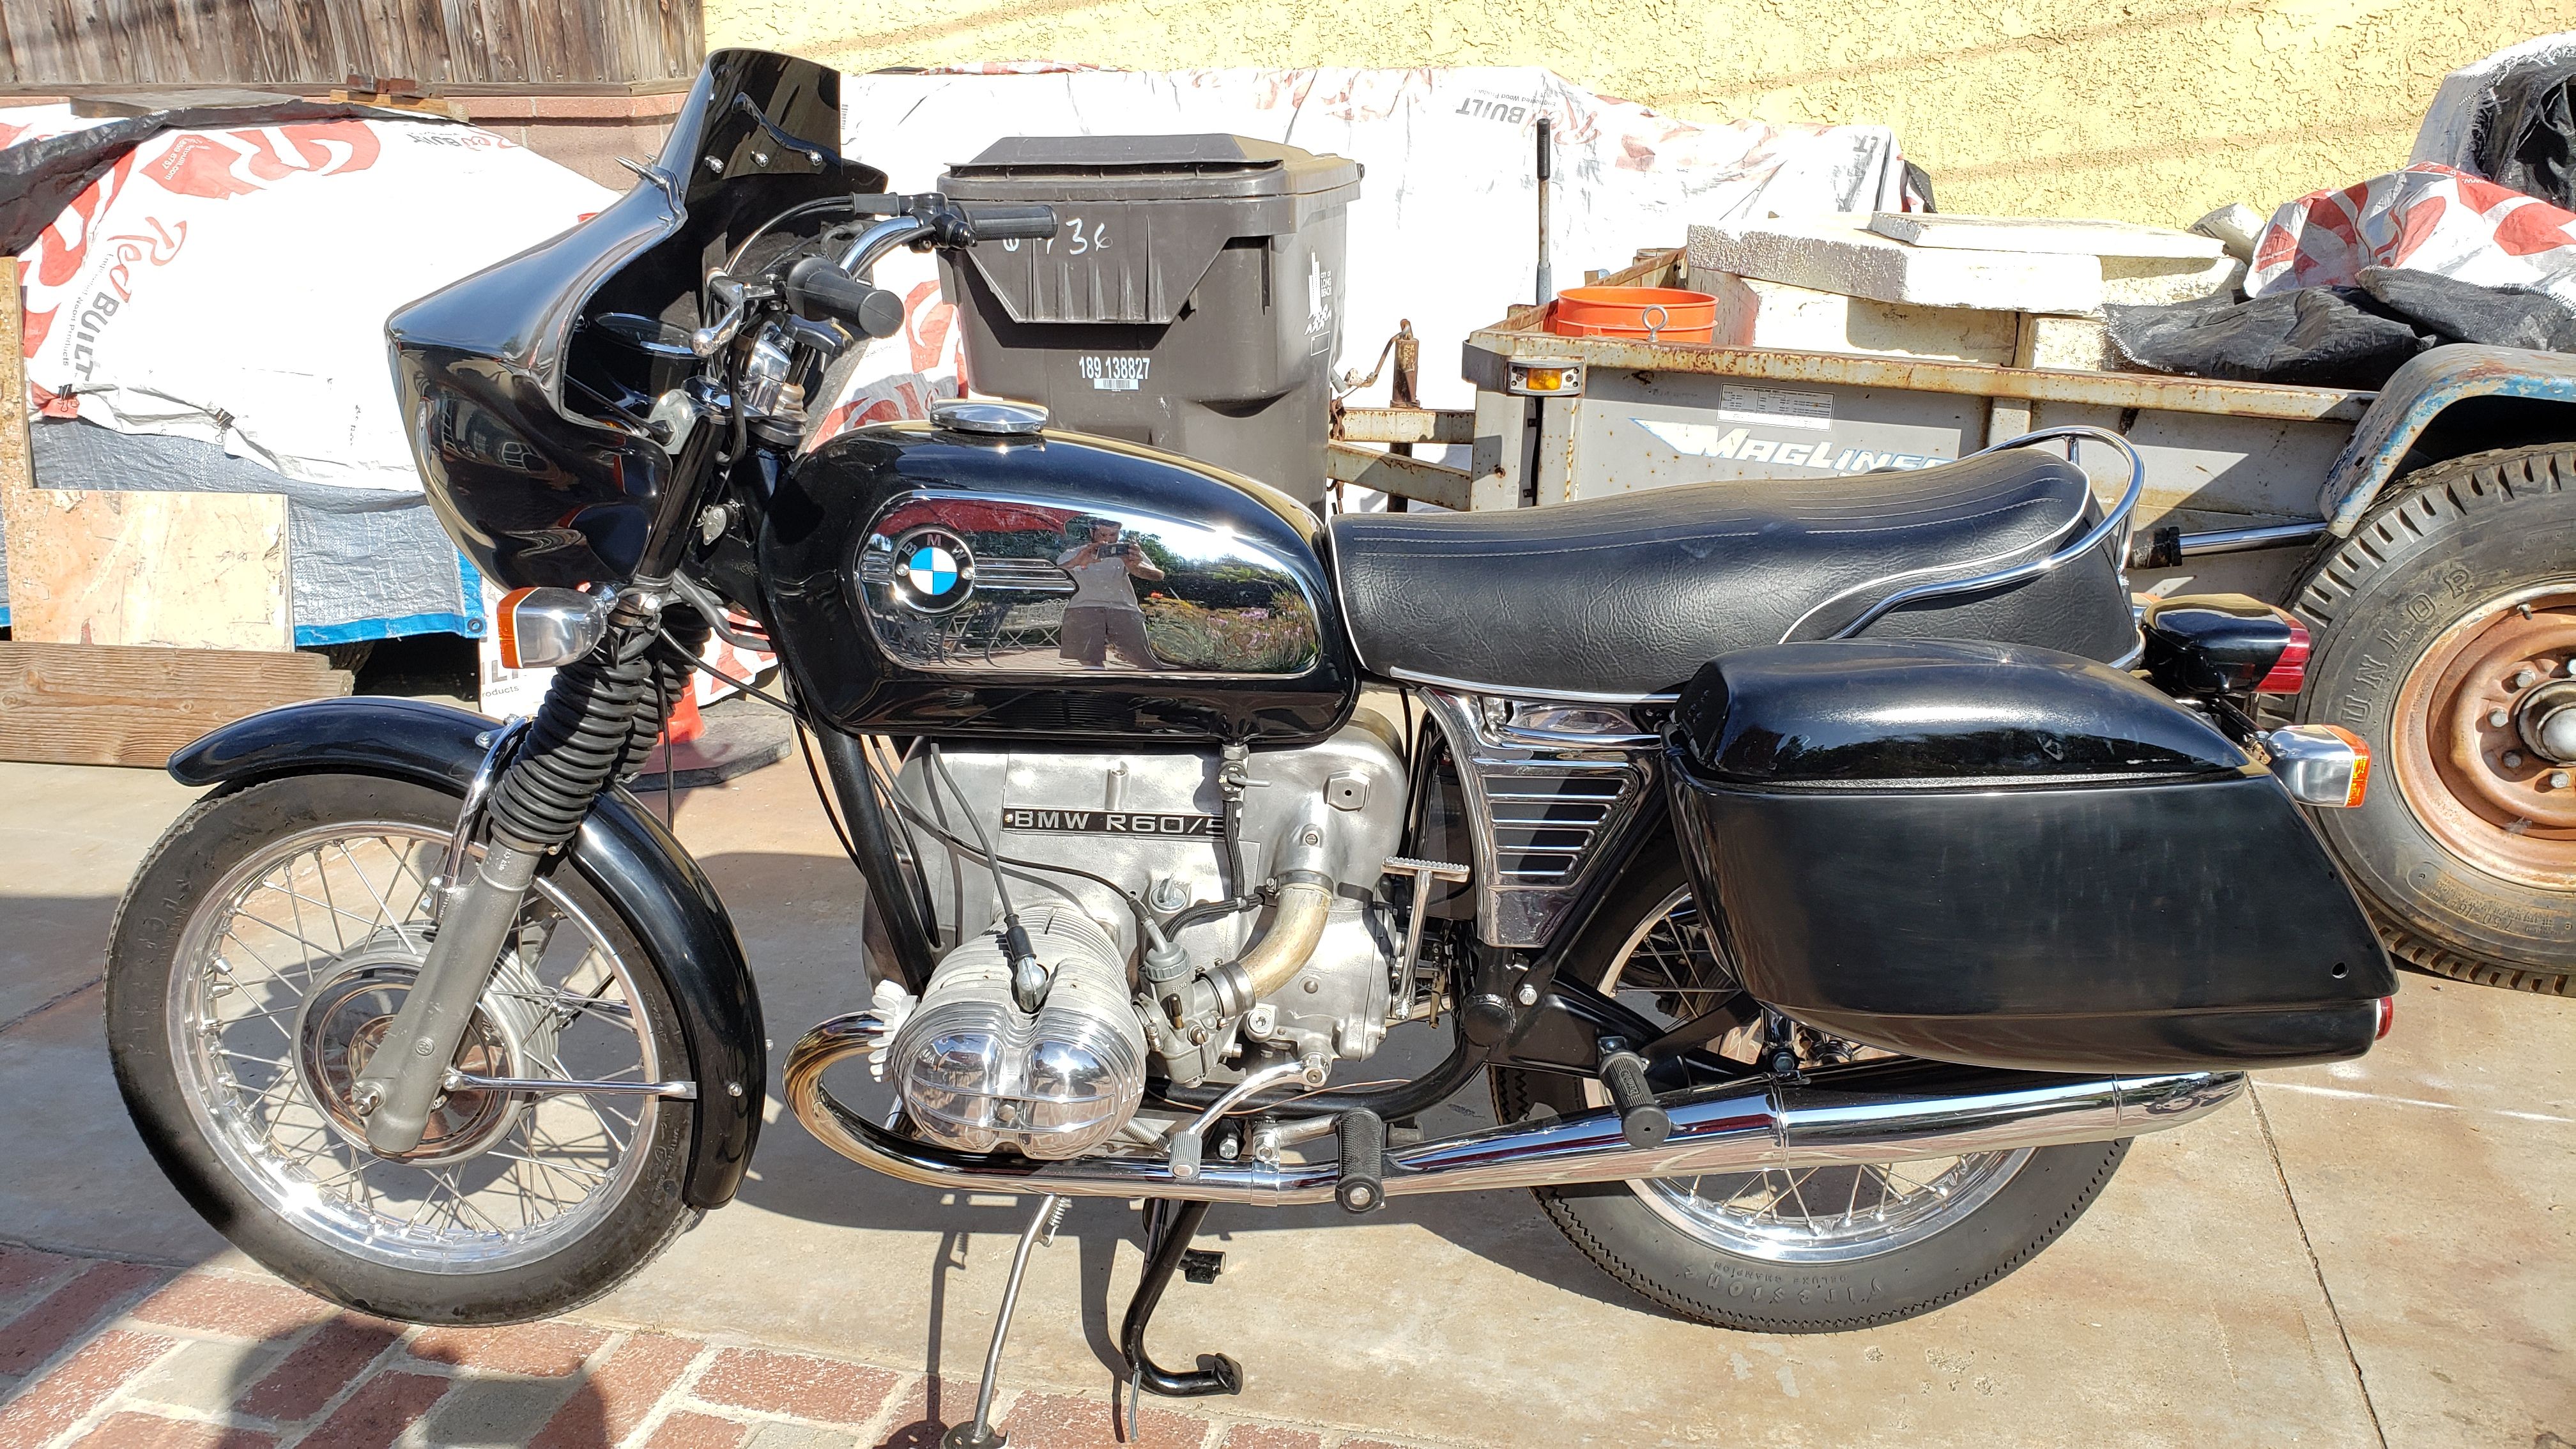 BMW r60/5 Toaster Airhead motorcycle bagger classic 1971 SWB